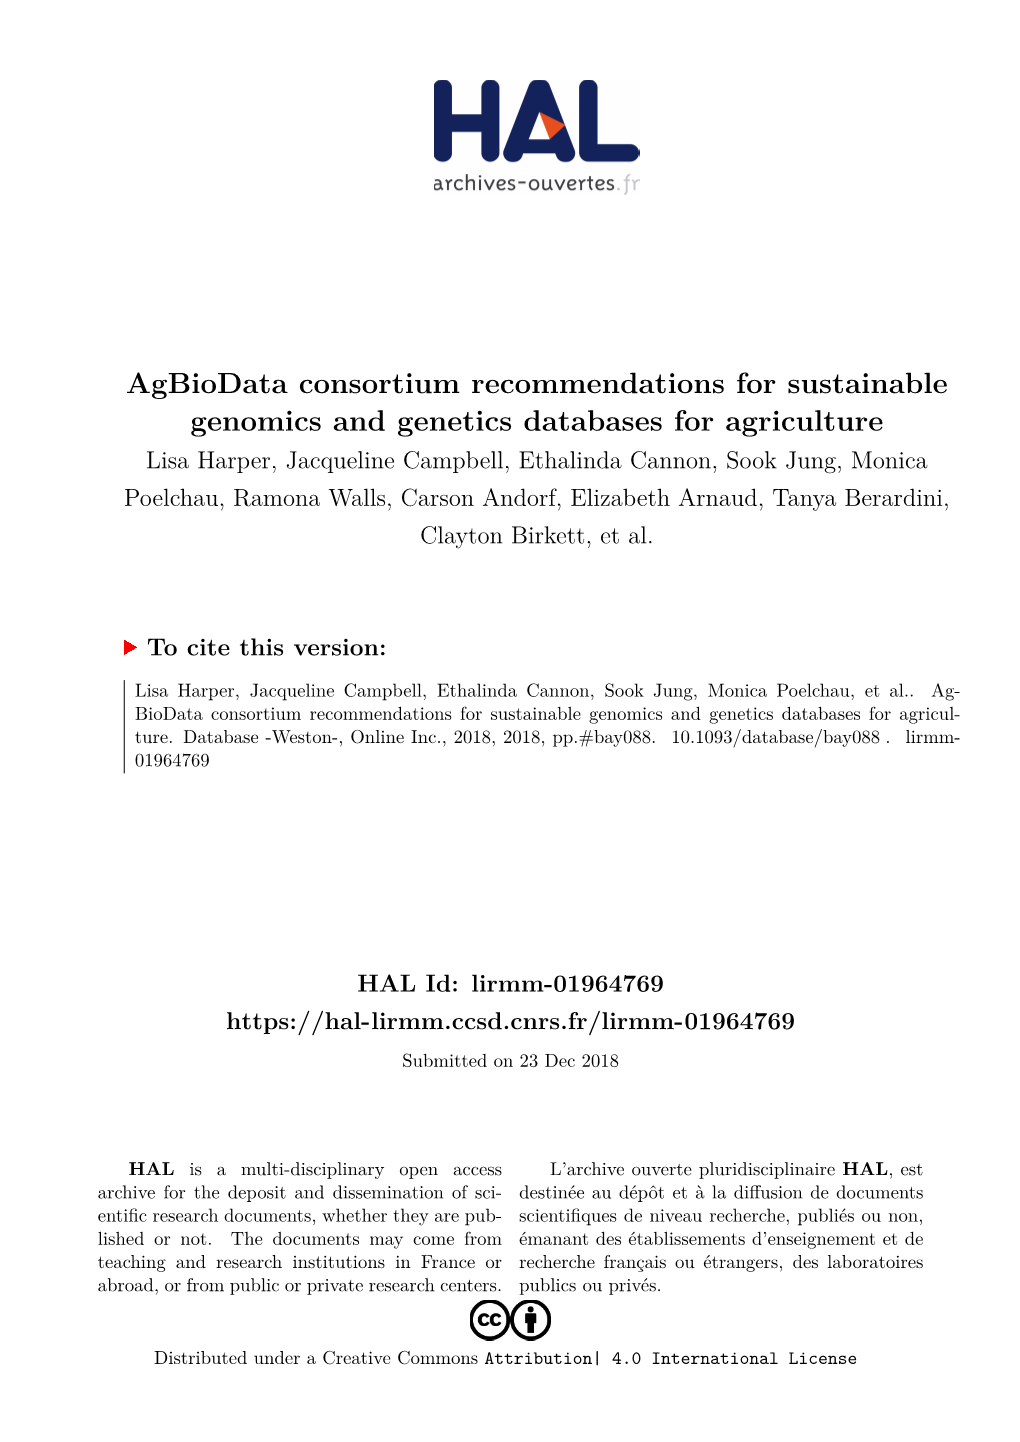 Agbiodata Consortium Recommendations for Sustainable